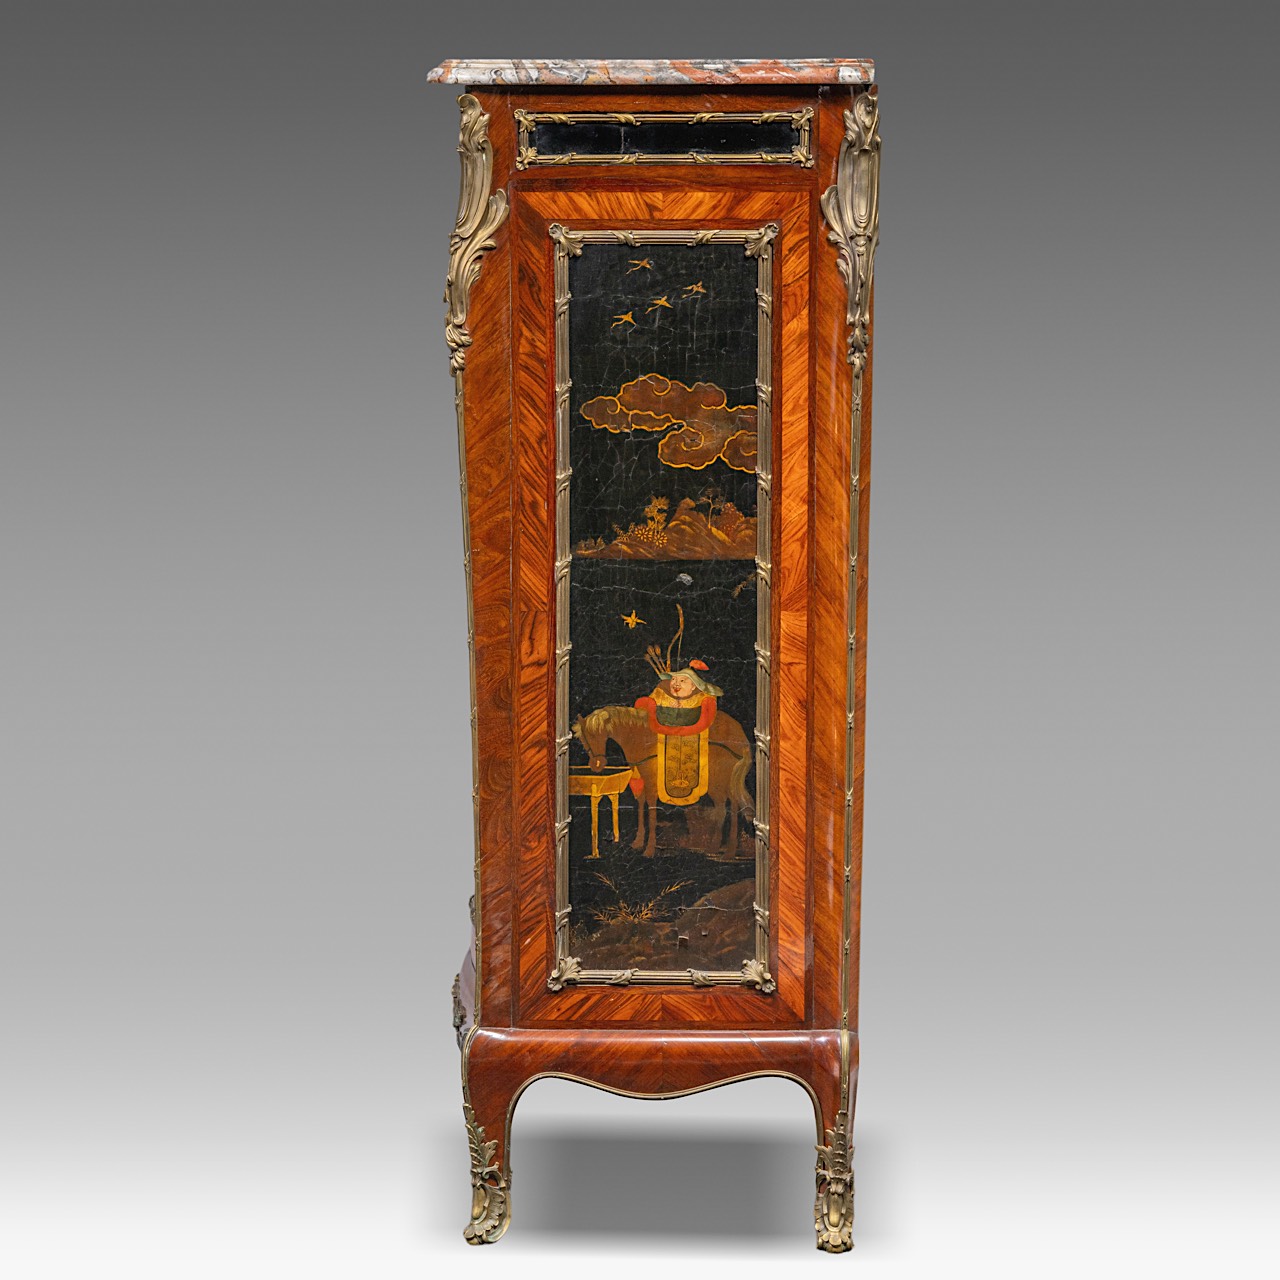 A marble-topped Louis XV (1723-1774) chinoiserie lacquered cabinet, H0125 cm - W 92 cm - D 47,5 cm - Image 4 of 8